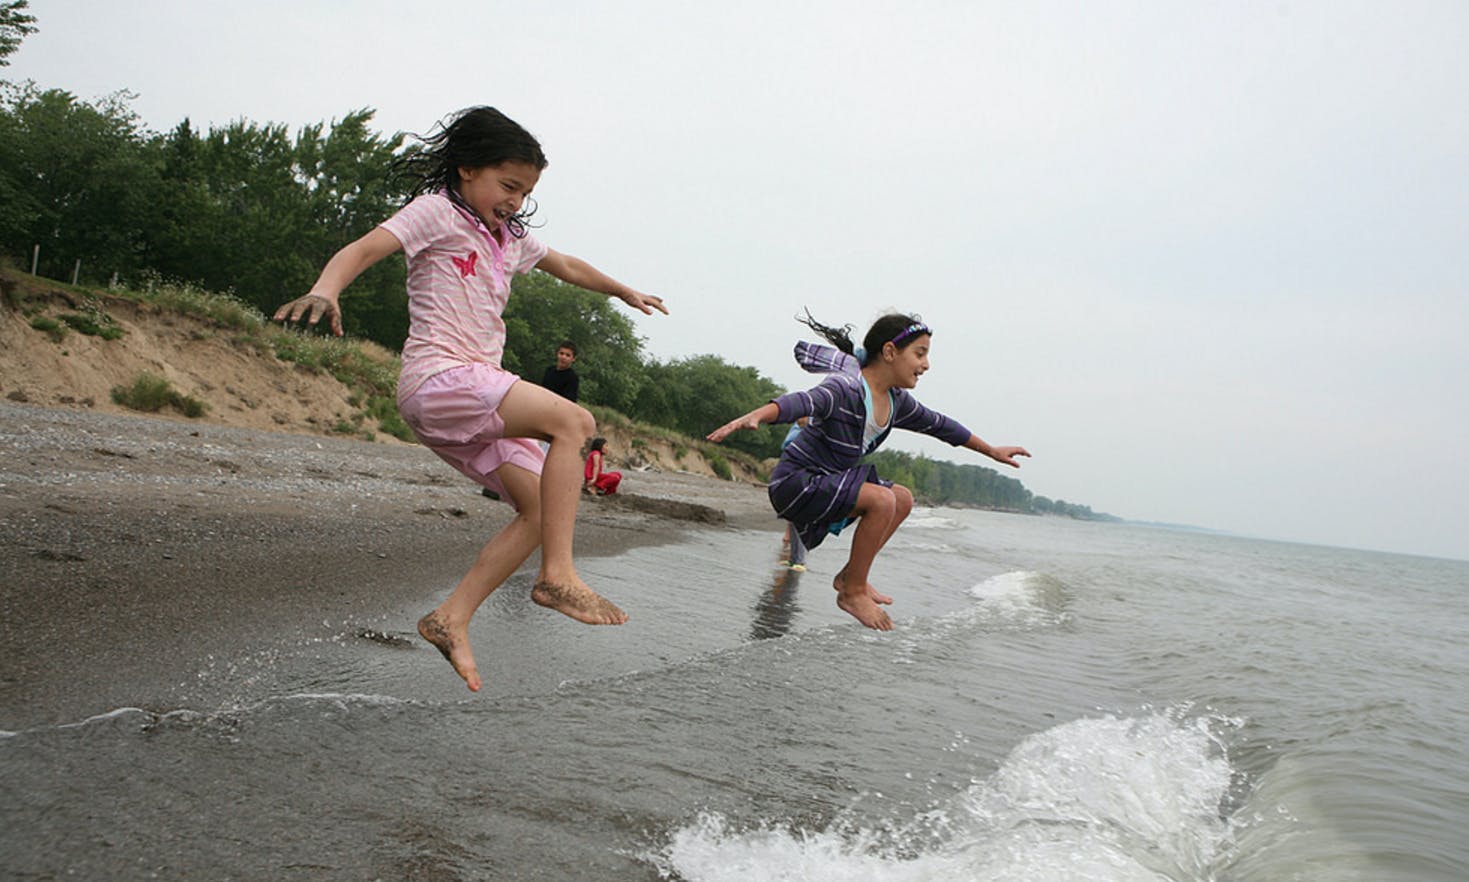 Kids jumping in the water at Wheatley Provincial Park, Ontario